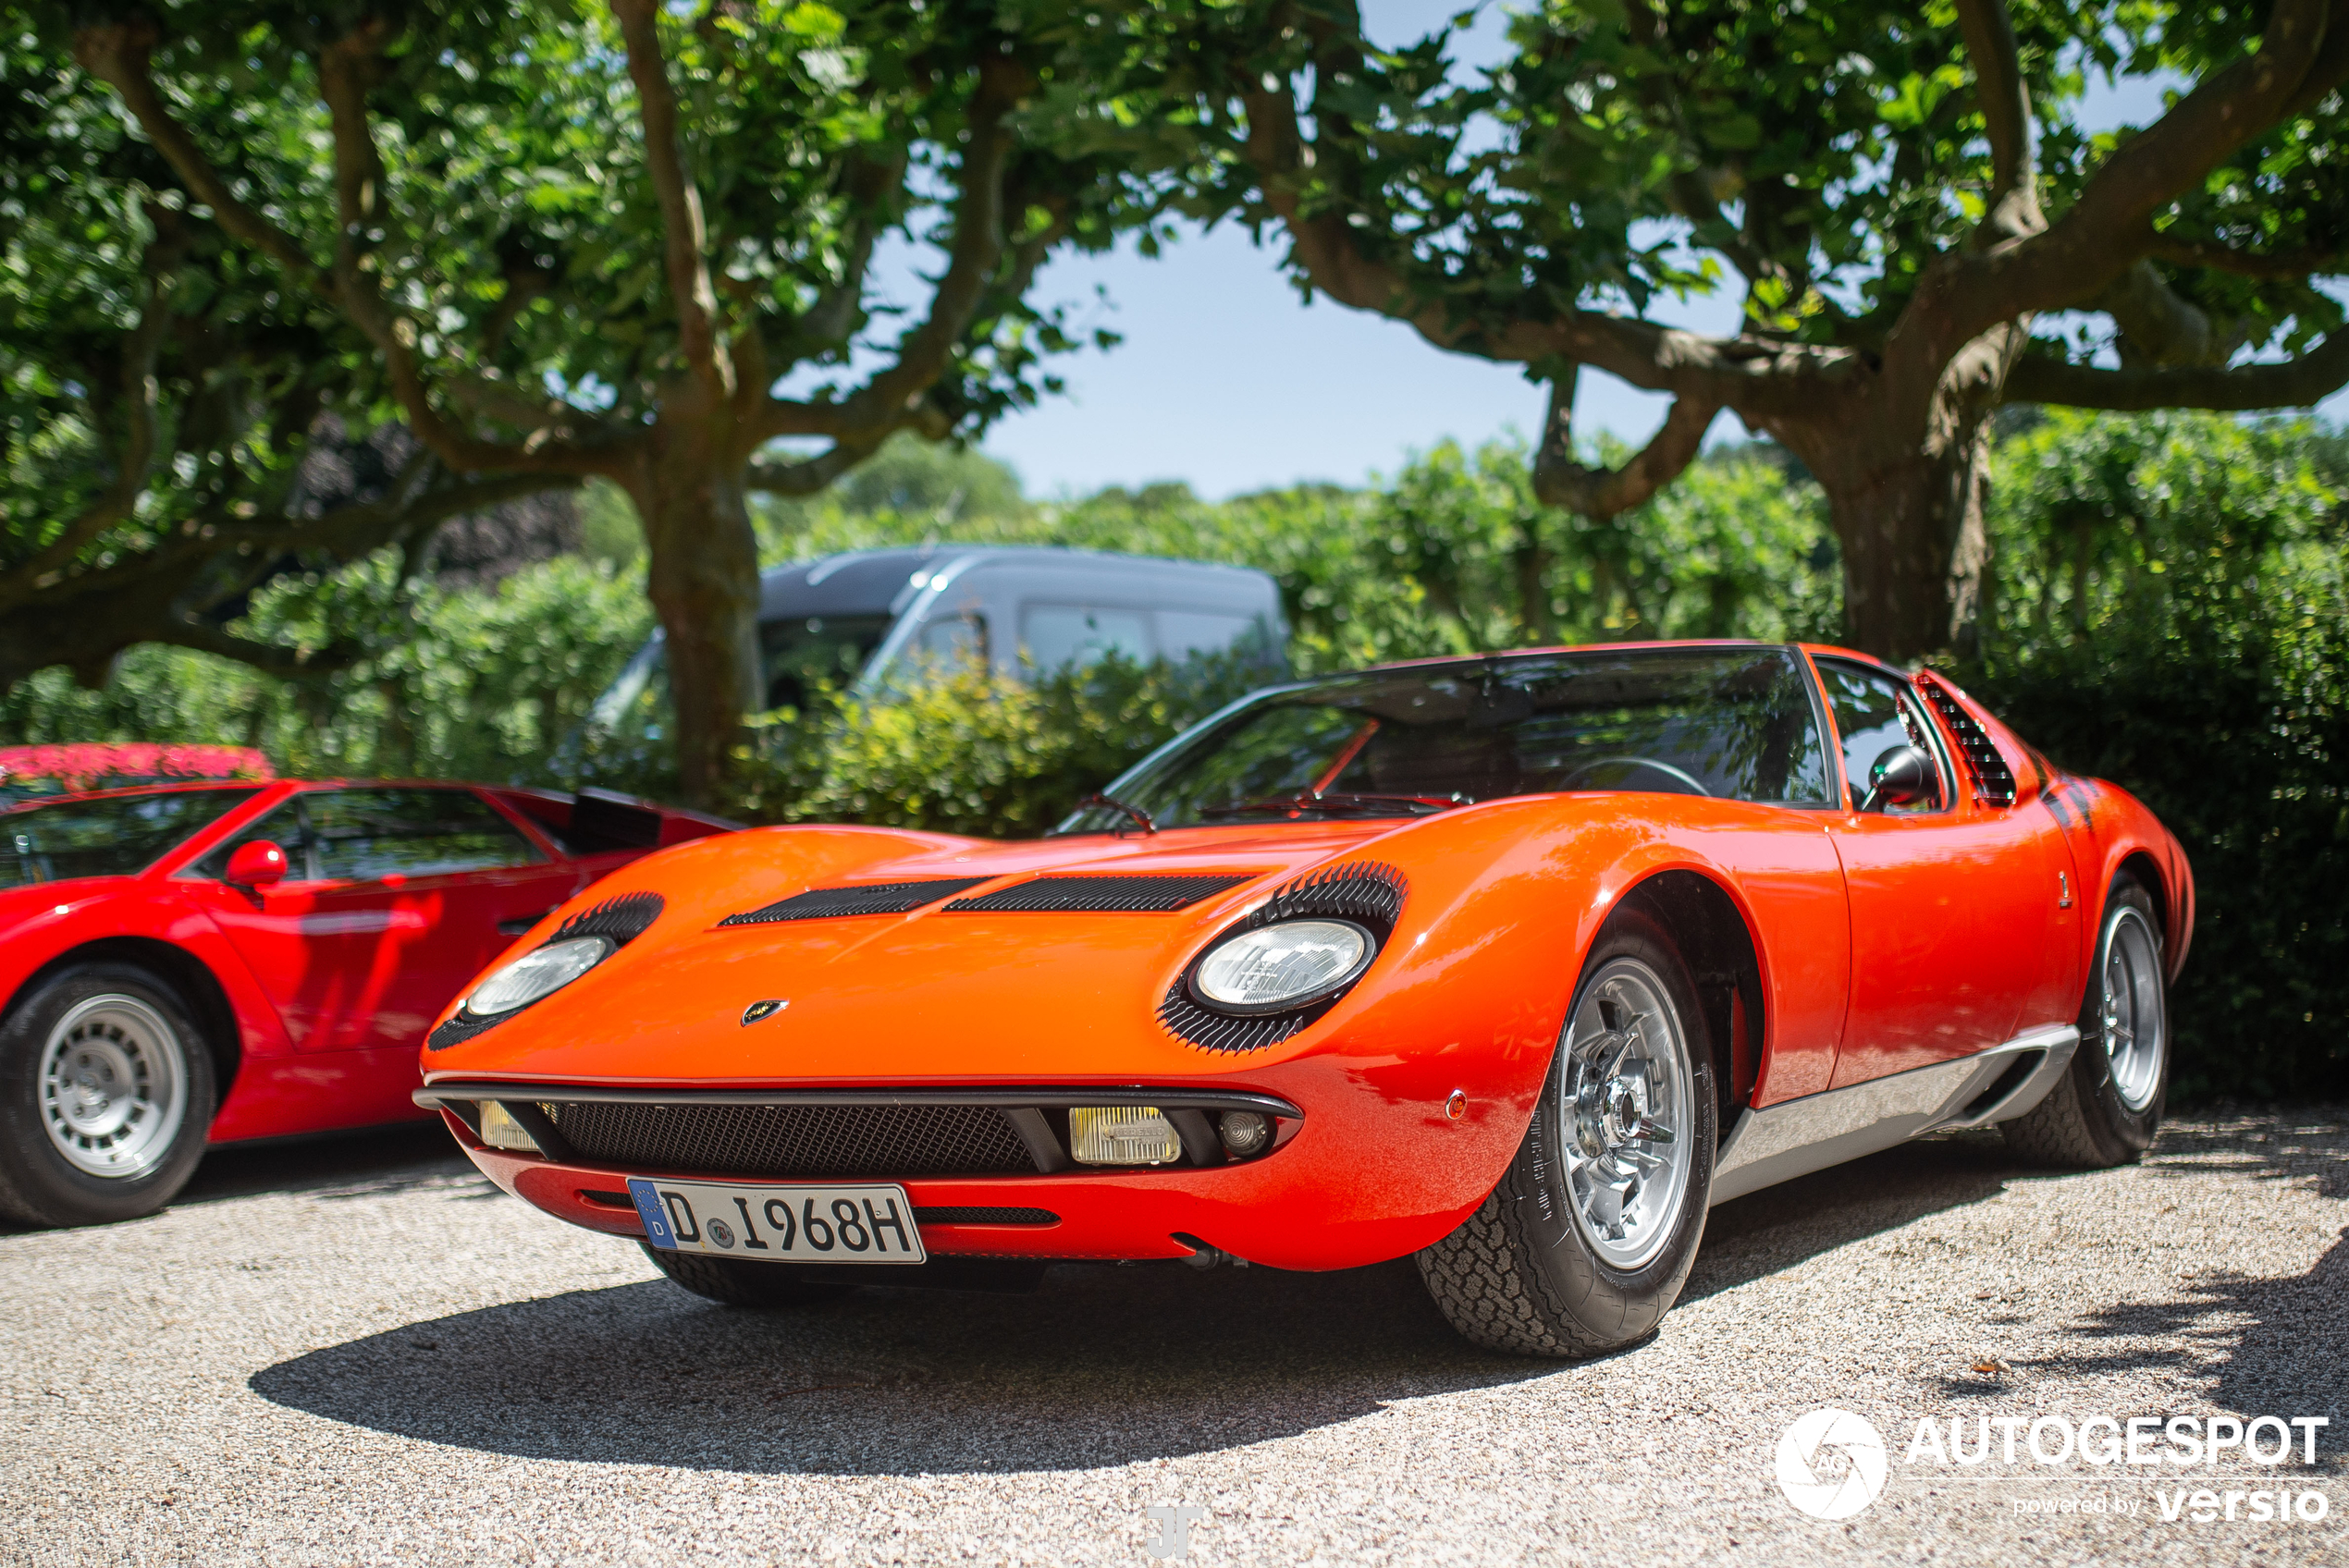 This Miura appears to come straight out of the movie "The Italian Job."